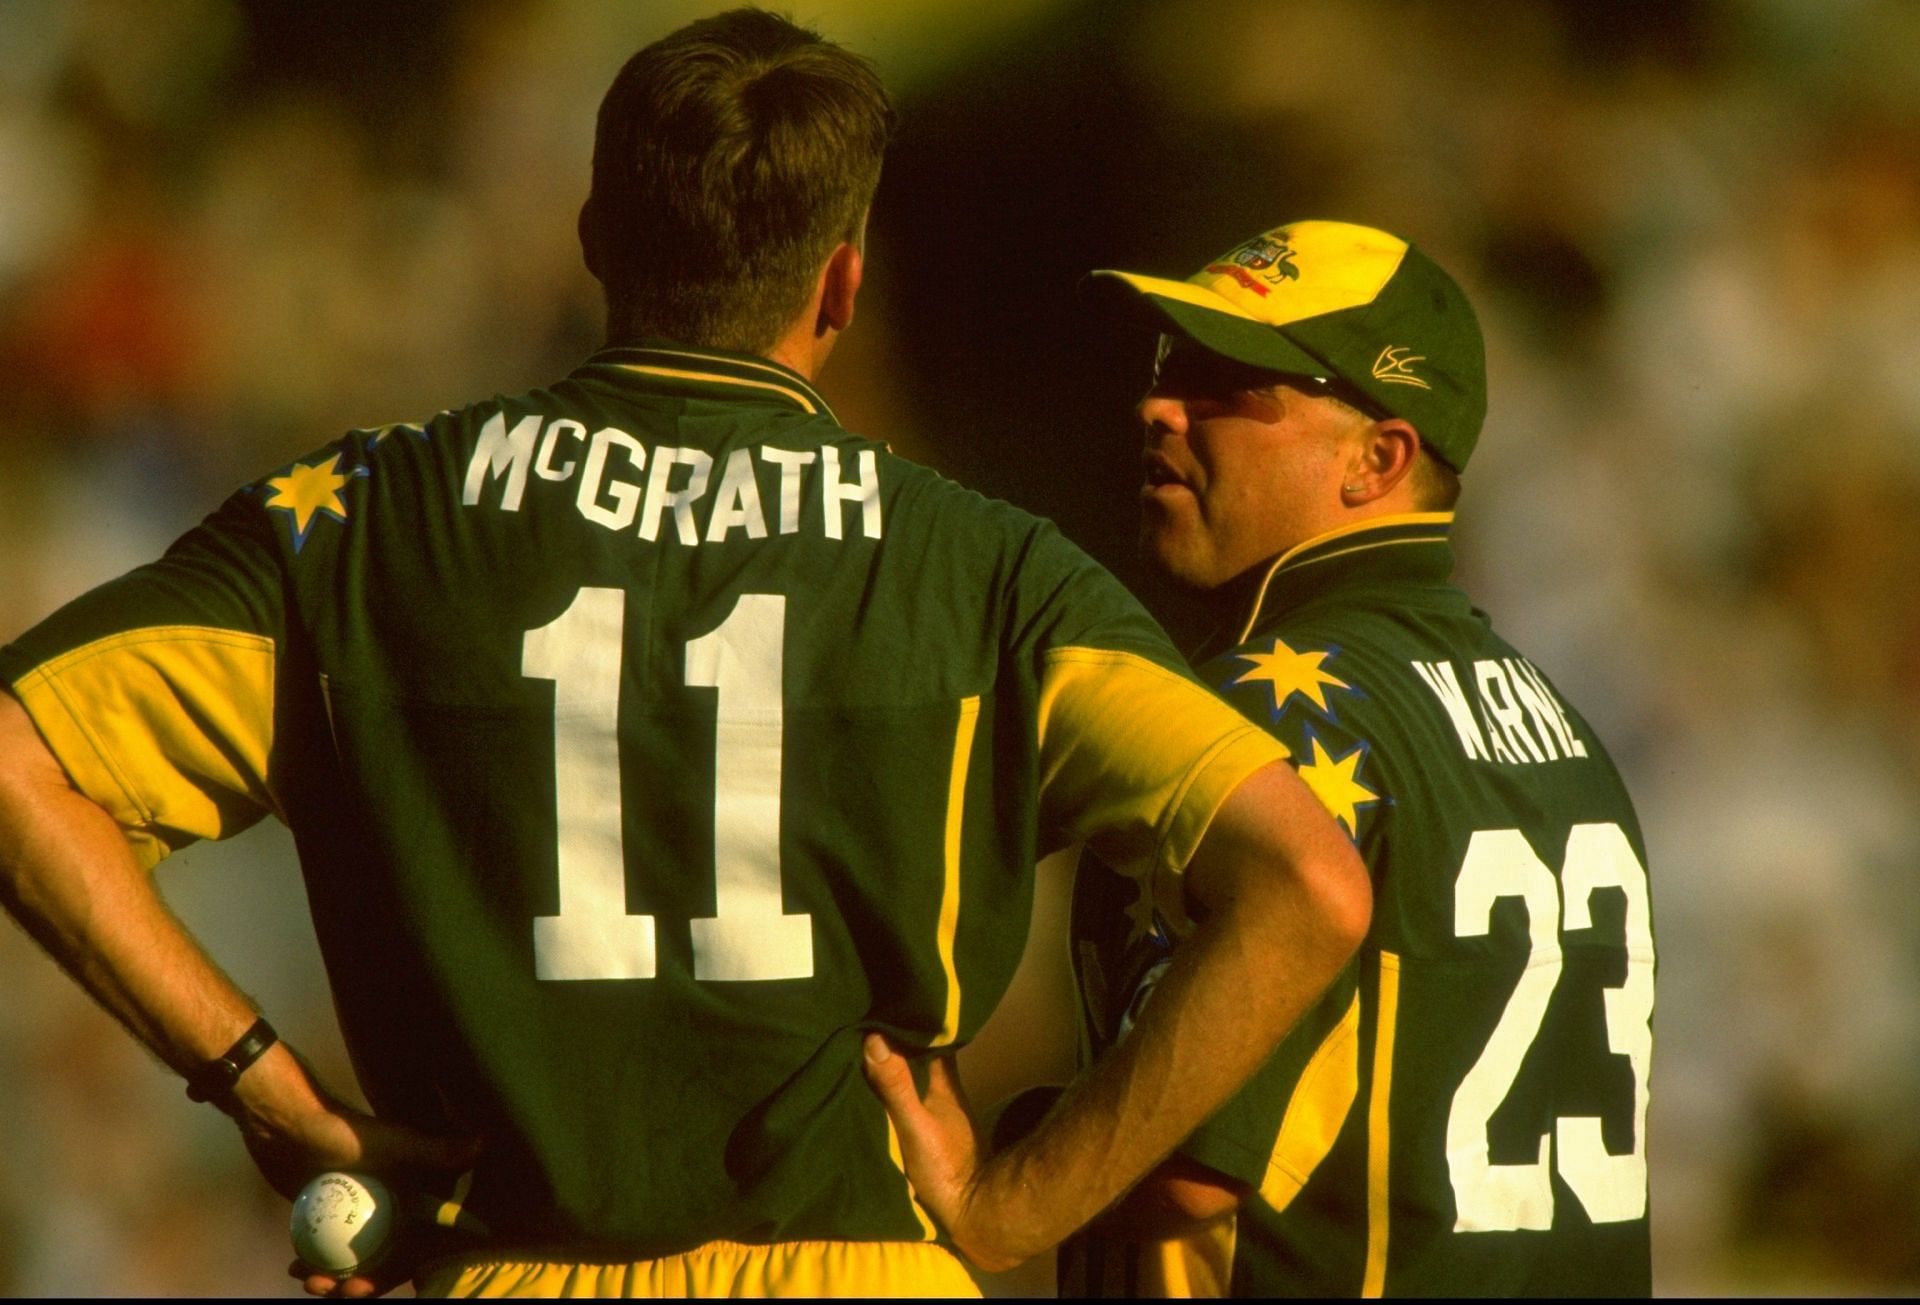 Glenn McGrath and Shane Warne are unarguably regarded as two of Australia&rsquo;s greatest match-winners. The duo are seen in discussion during the first final of the Carlton and United One Day Series against England at the Sydney Cricket Ground in February 1999. Pic: Getty Images